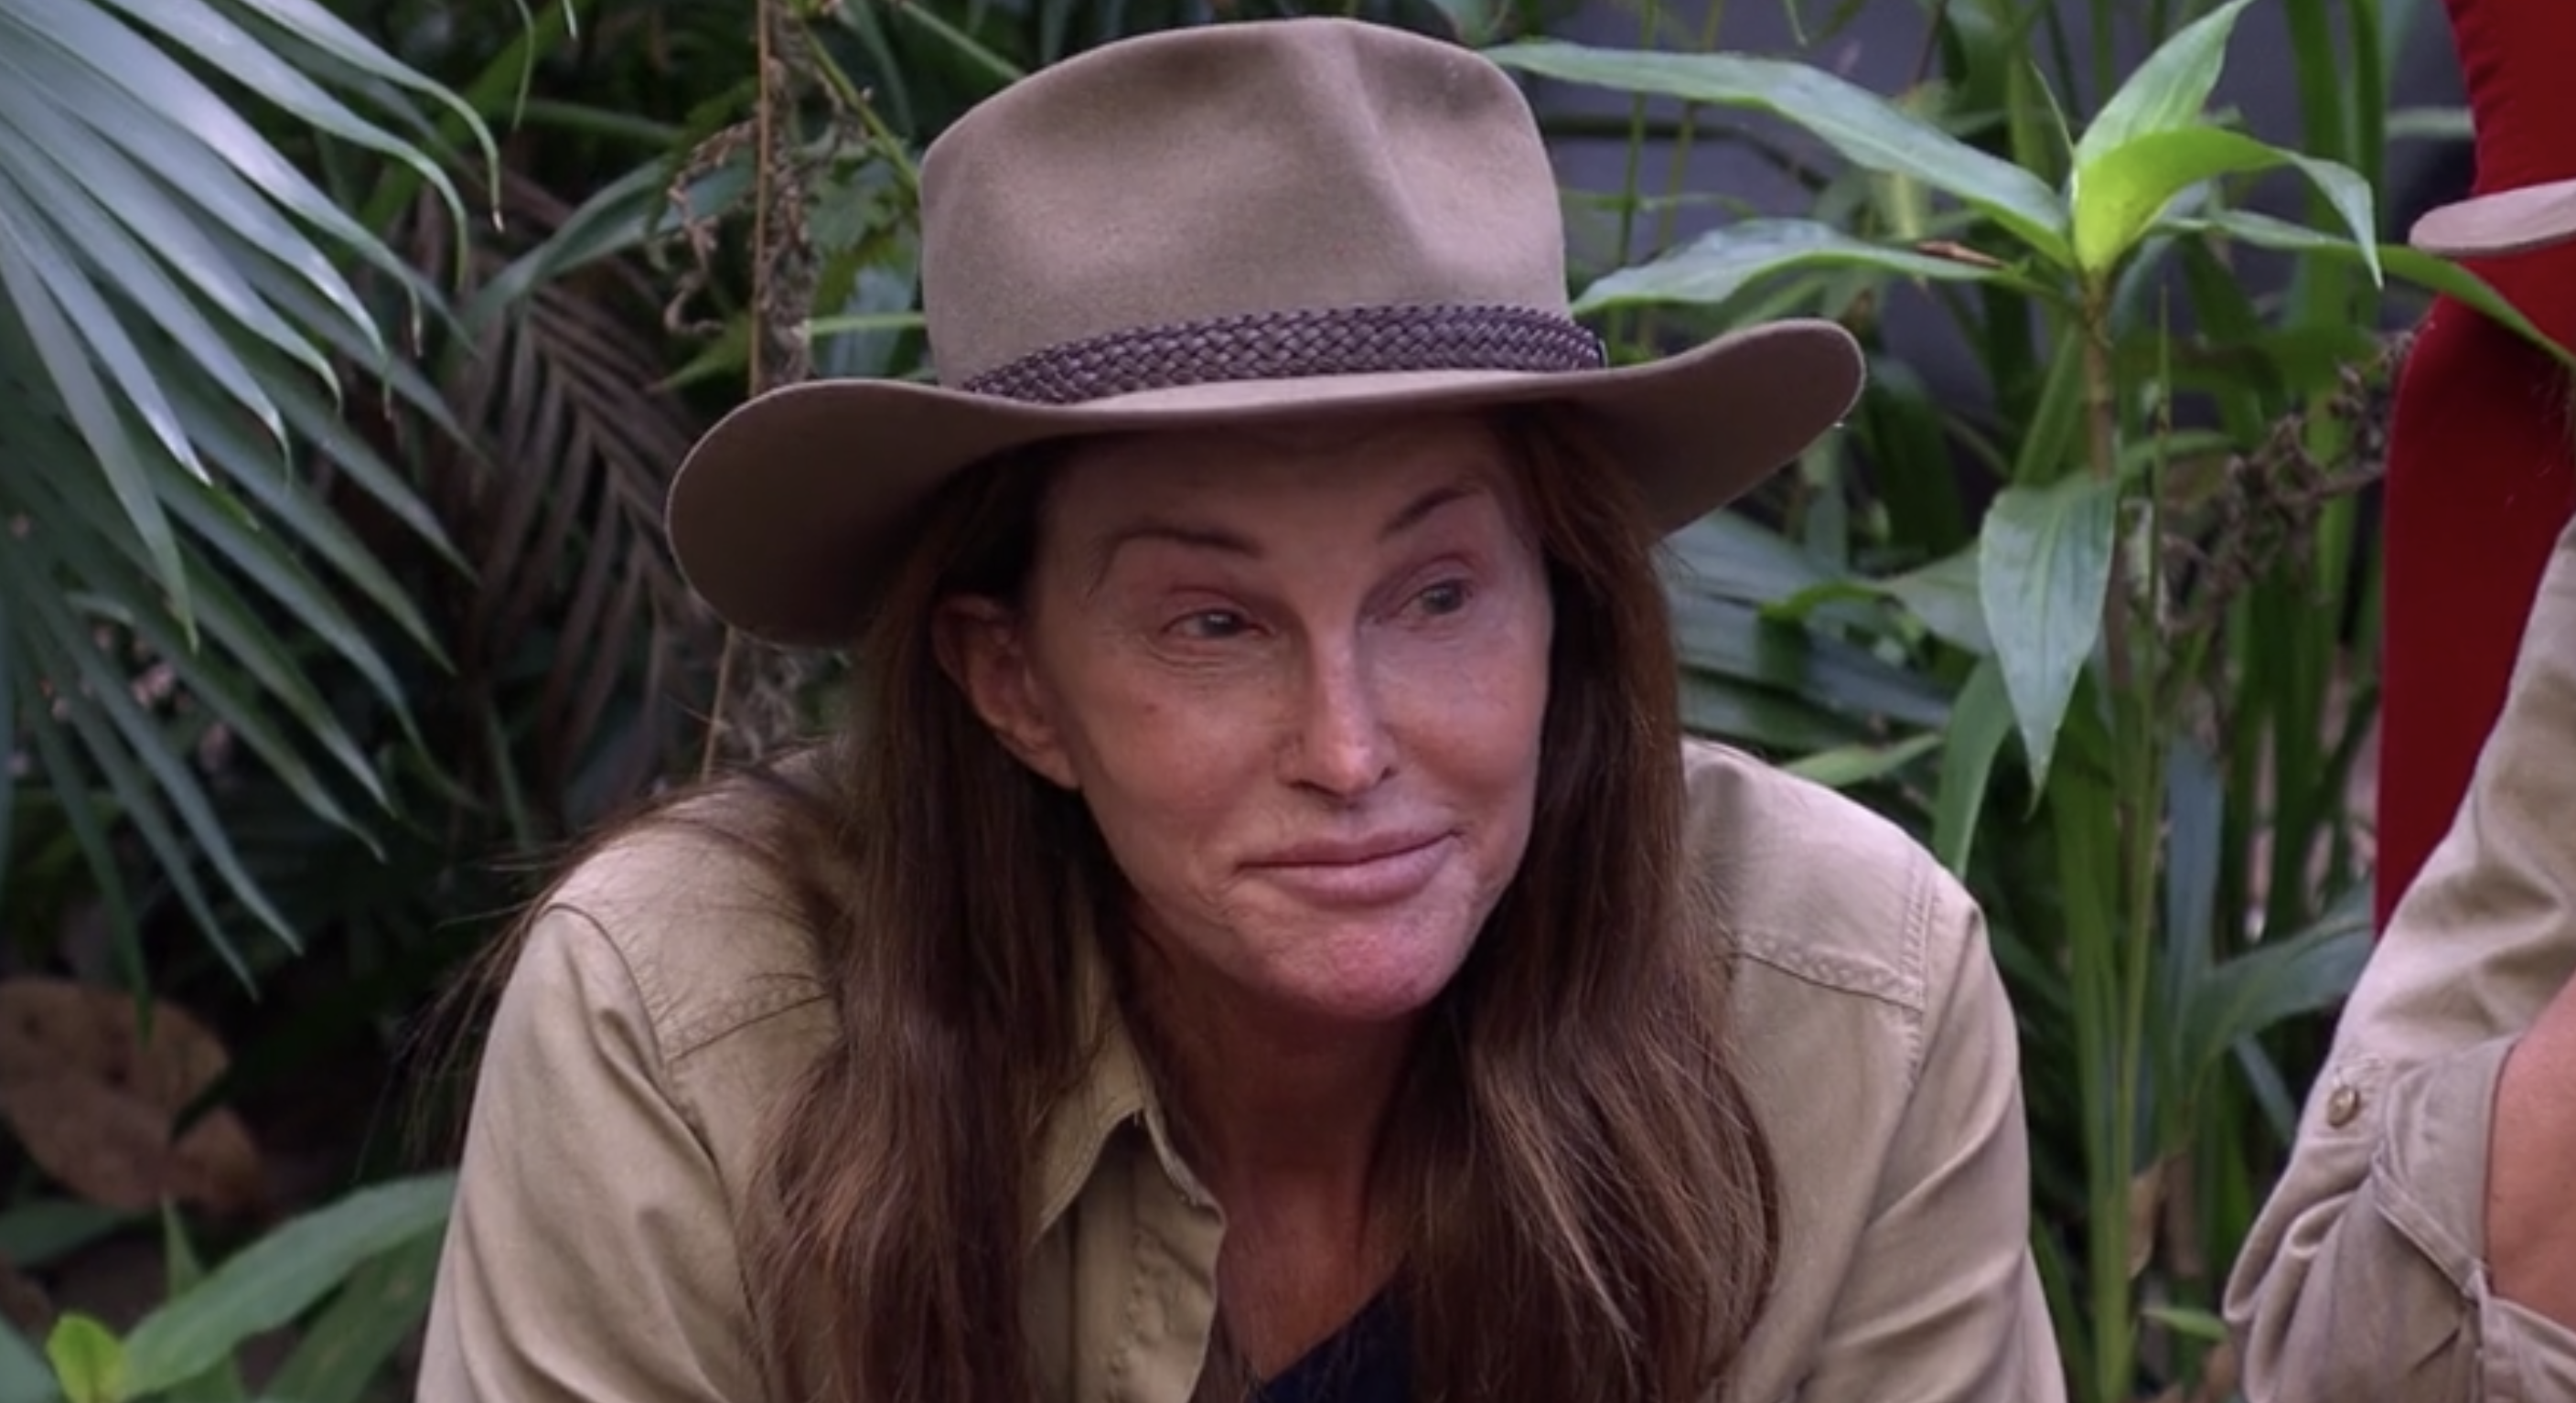 When did Bruce do I'm A Celebrity? Did he do well on the show?